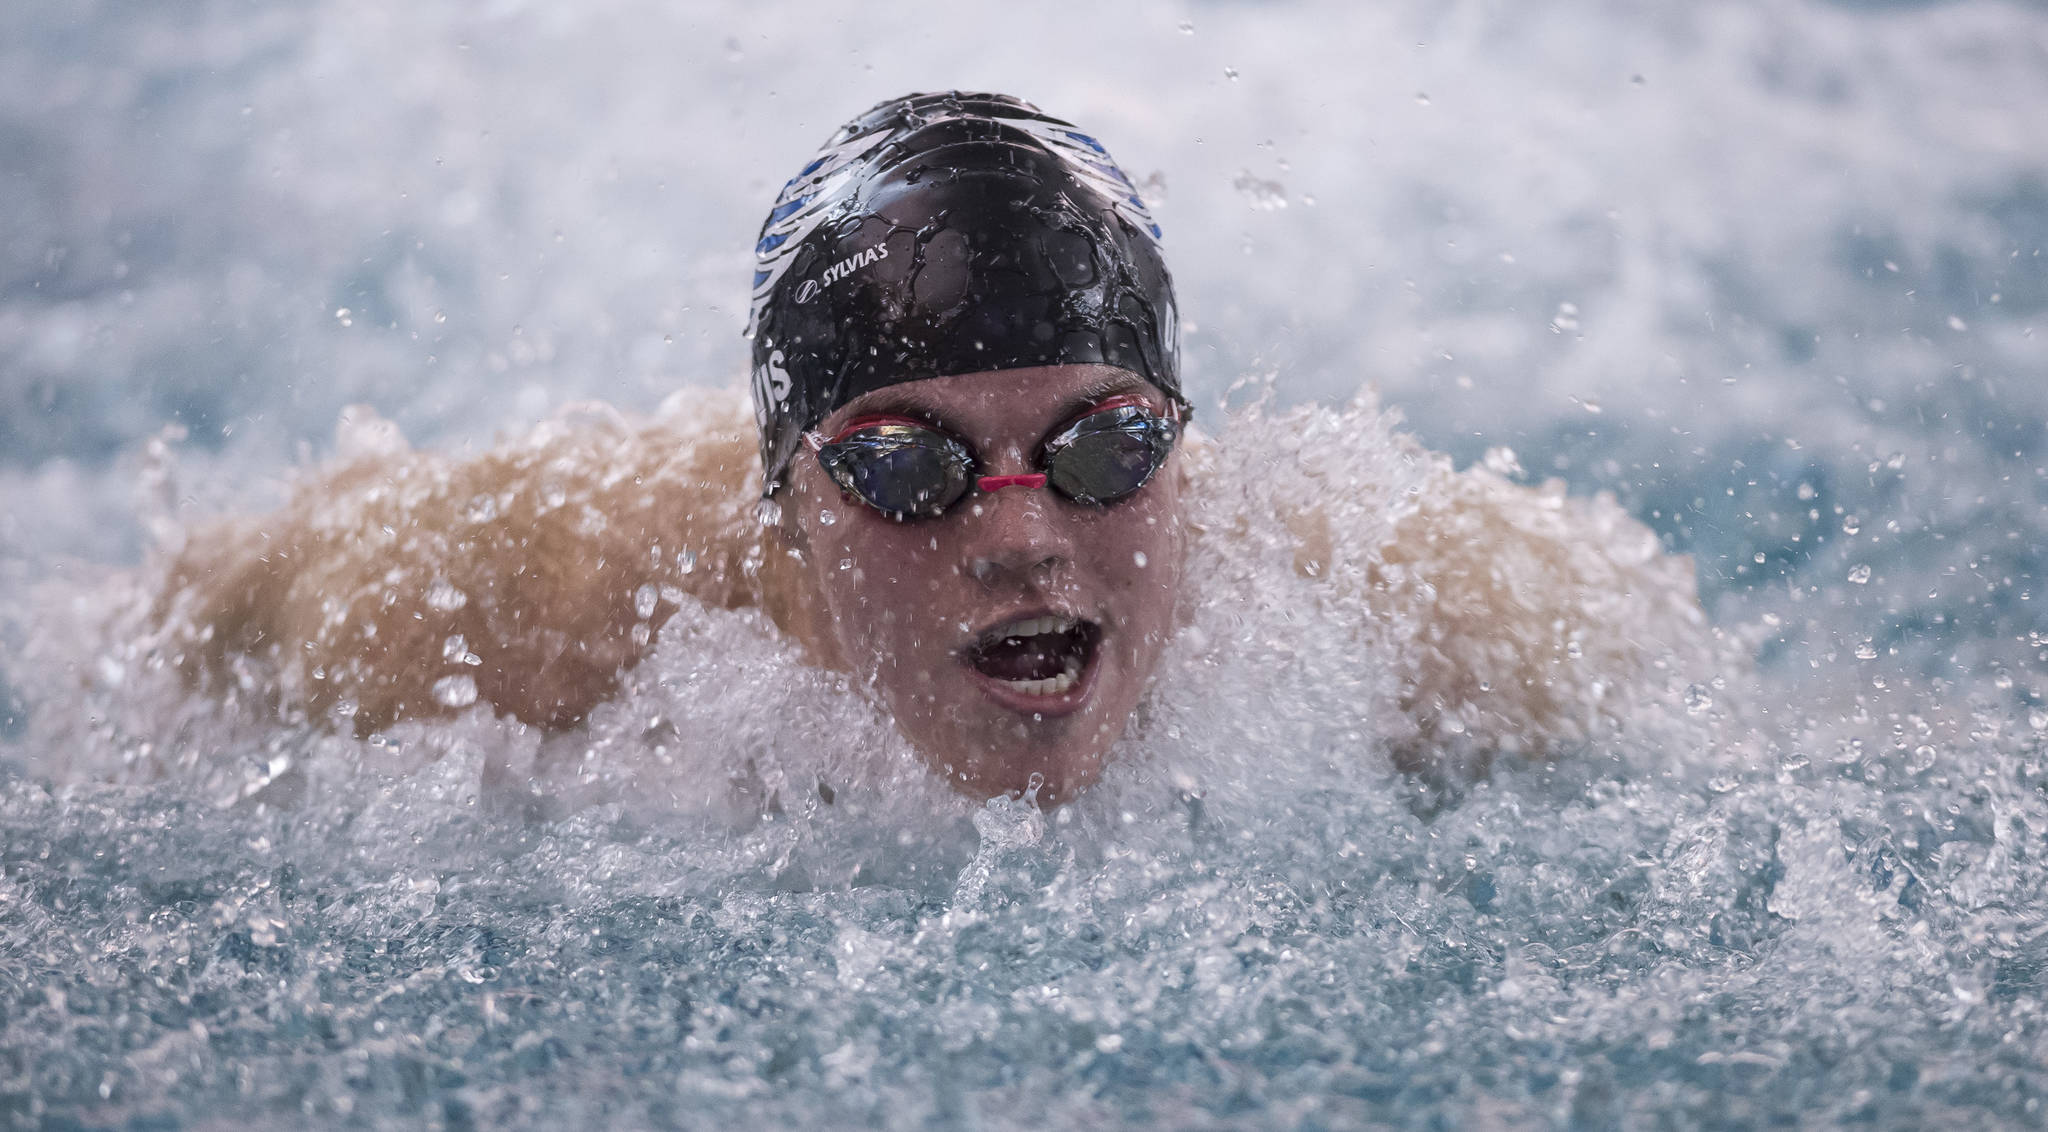 Bergen Davis swims in the Men’s 200 Yard IM preliminary at the Southeast Alaska Regional Swim and Dive Championships at Thunder Mountain High School on Friday, Oct. 27, 2017. (Michael Penn | Juneau Empire)